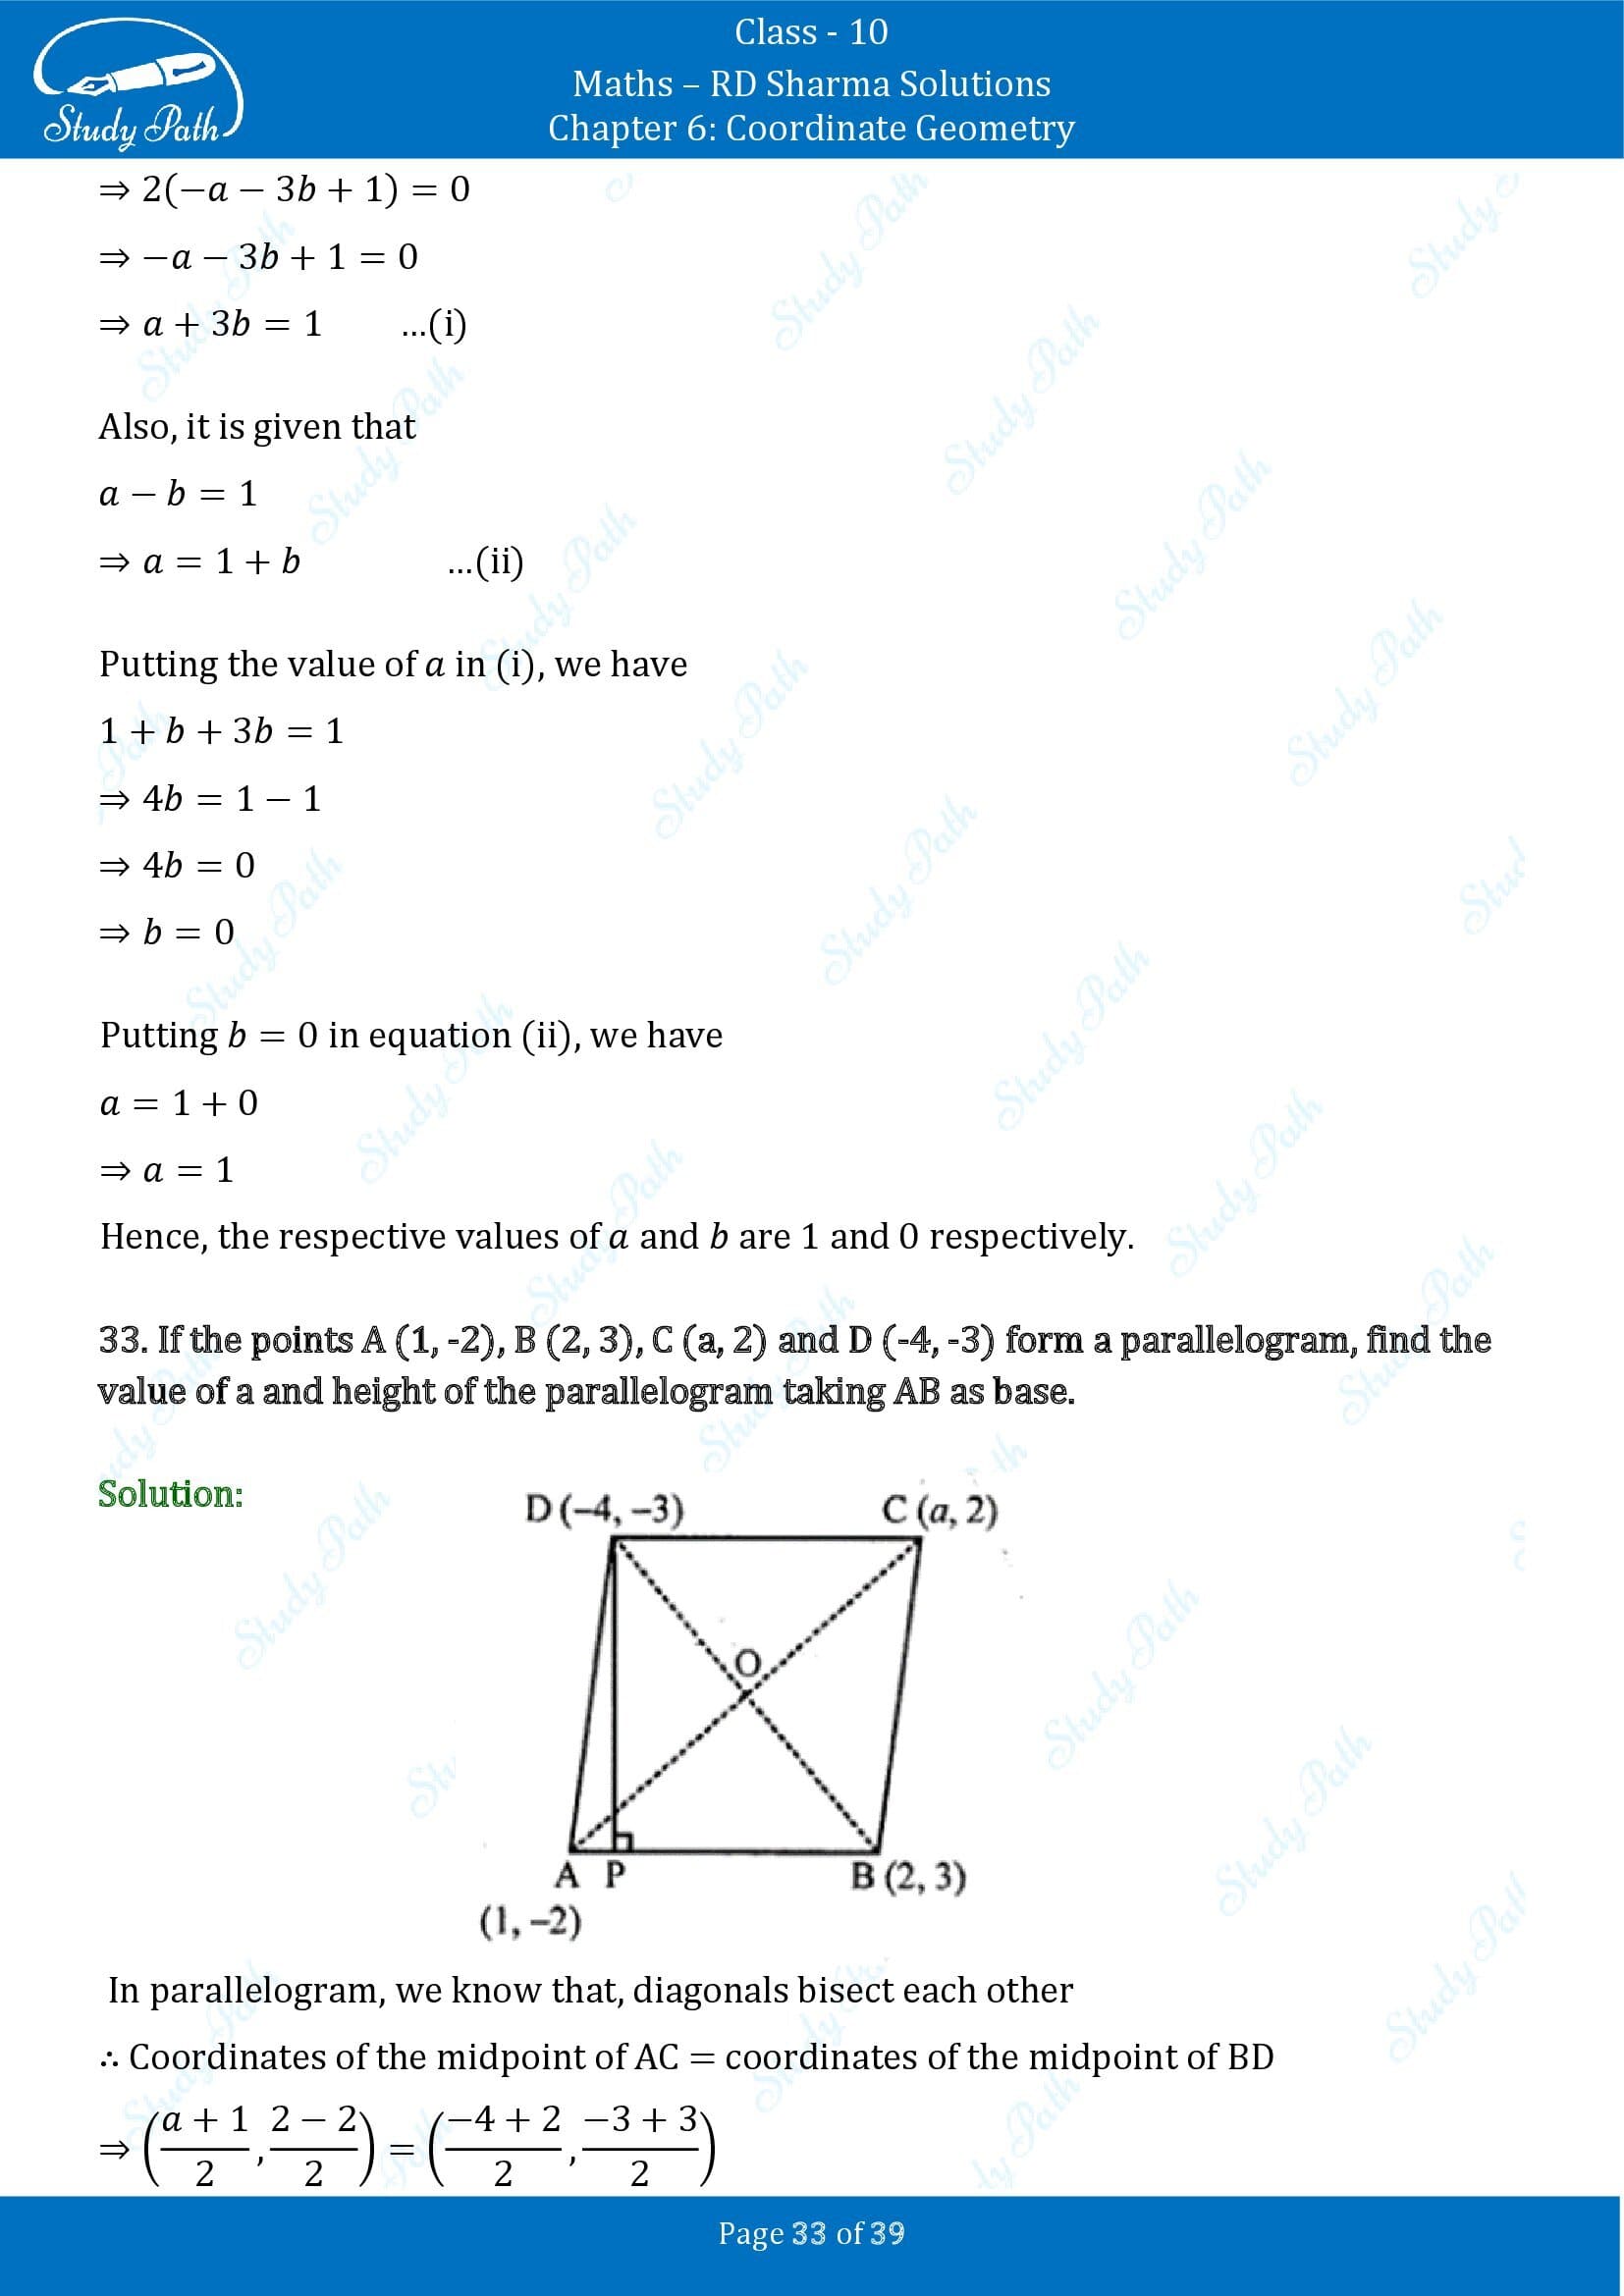 RD Sharma Solutions Class 10 Chapter 6 Coordinate Geometry Exercise 6.5 0033